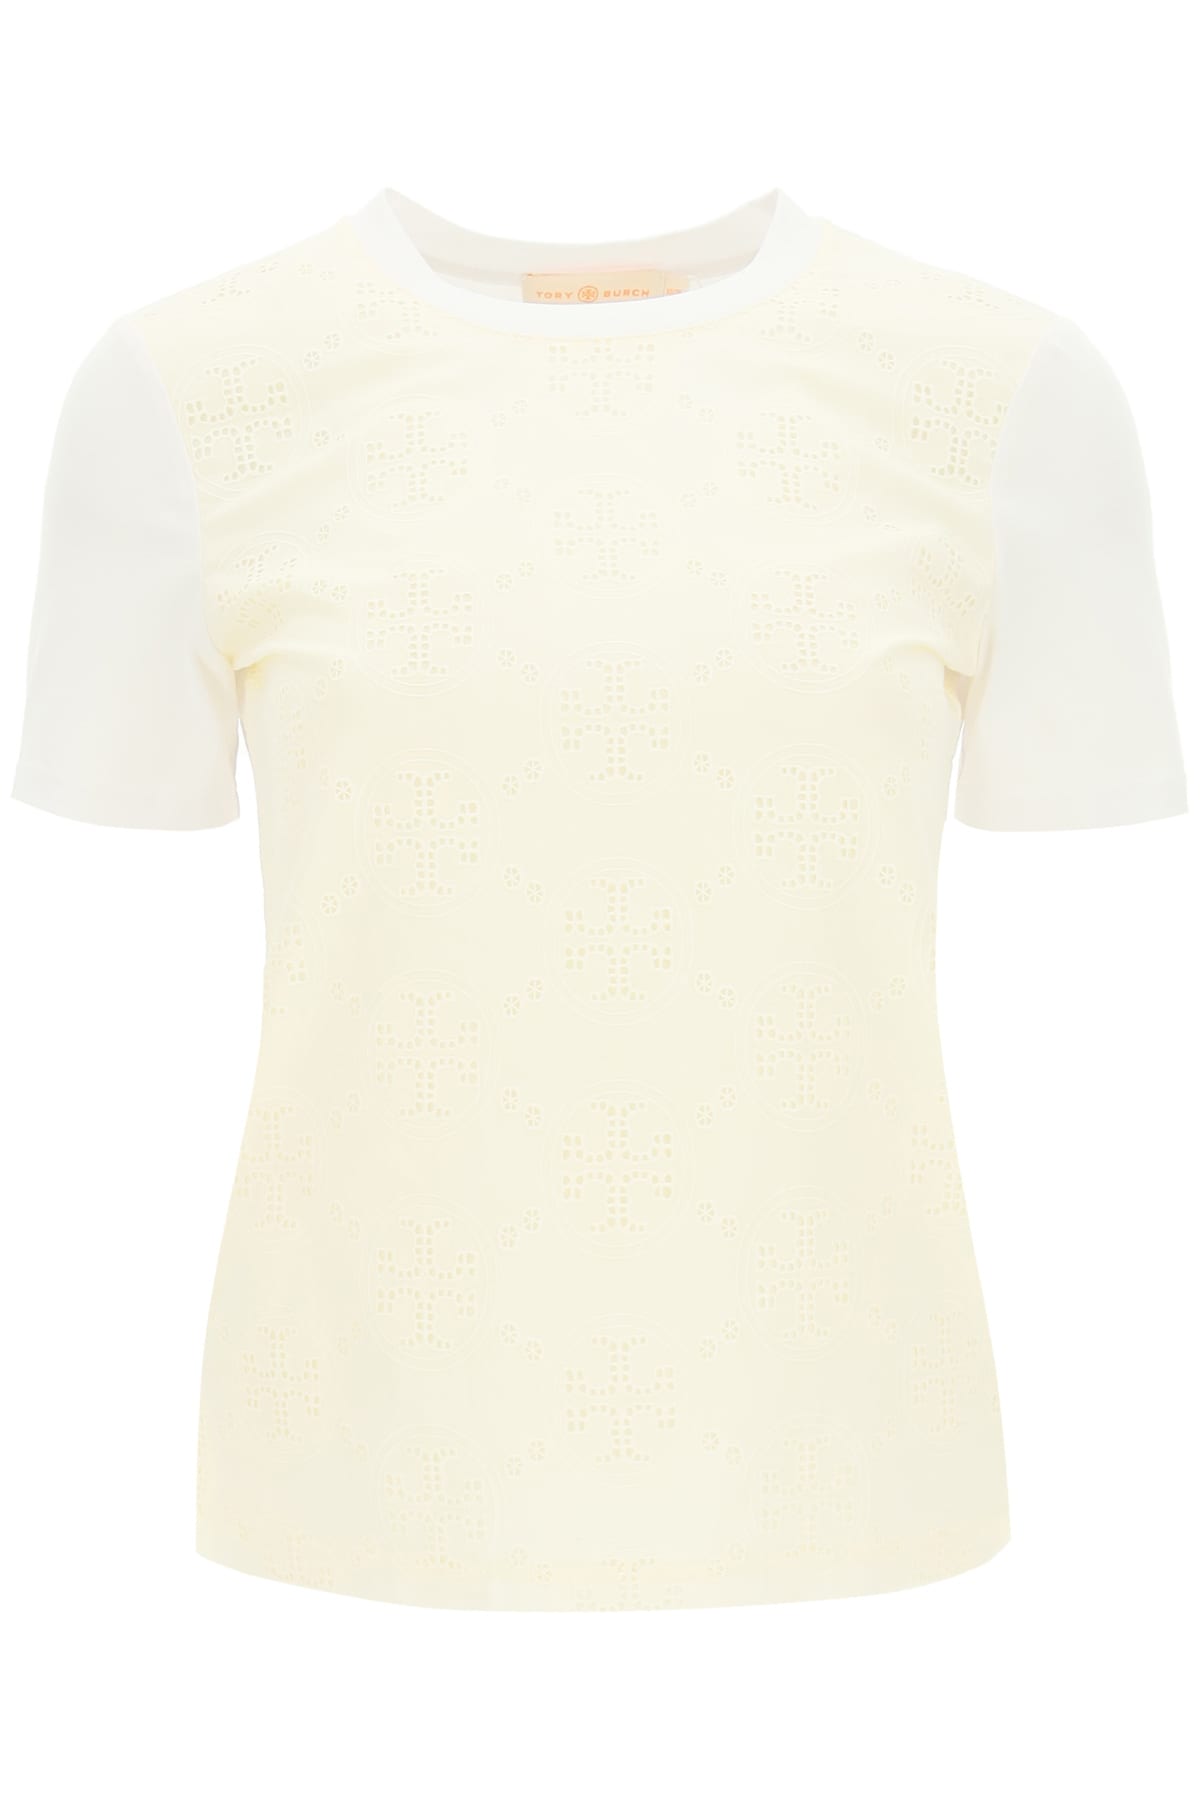 Tory Burch T-shirt With Logo Embroidery | italist, ALWAYS LIKE A SALE